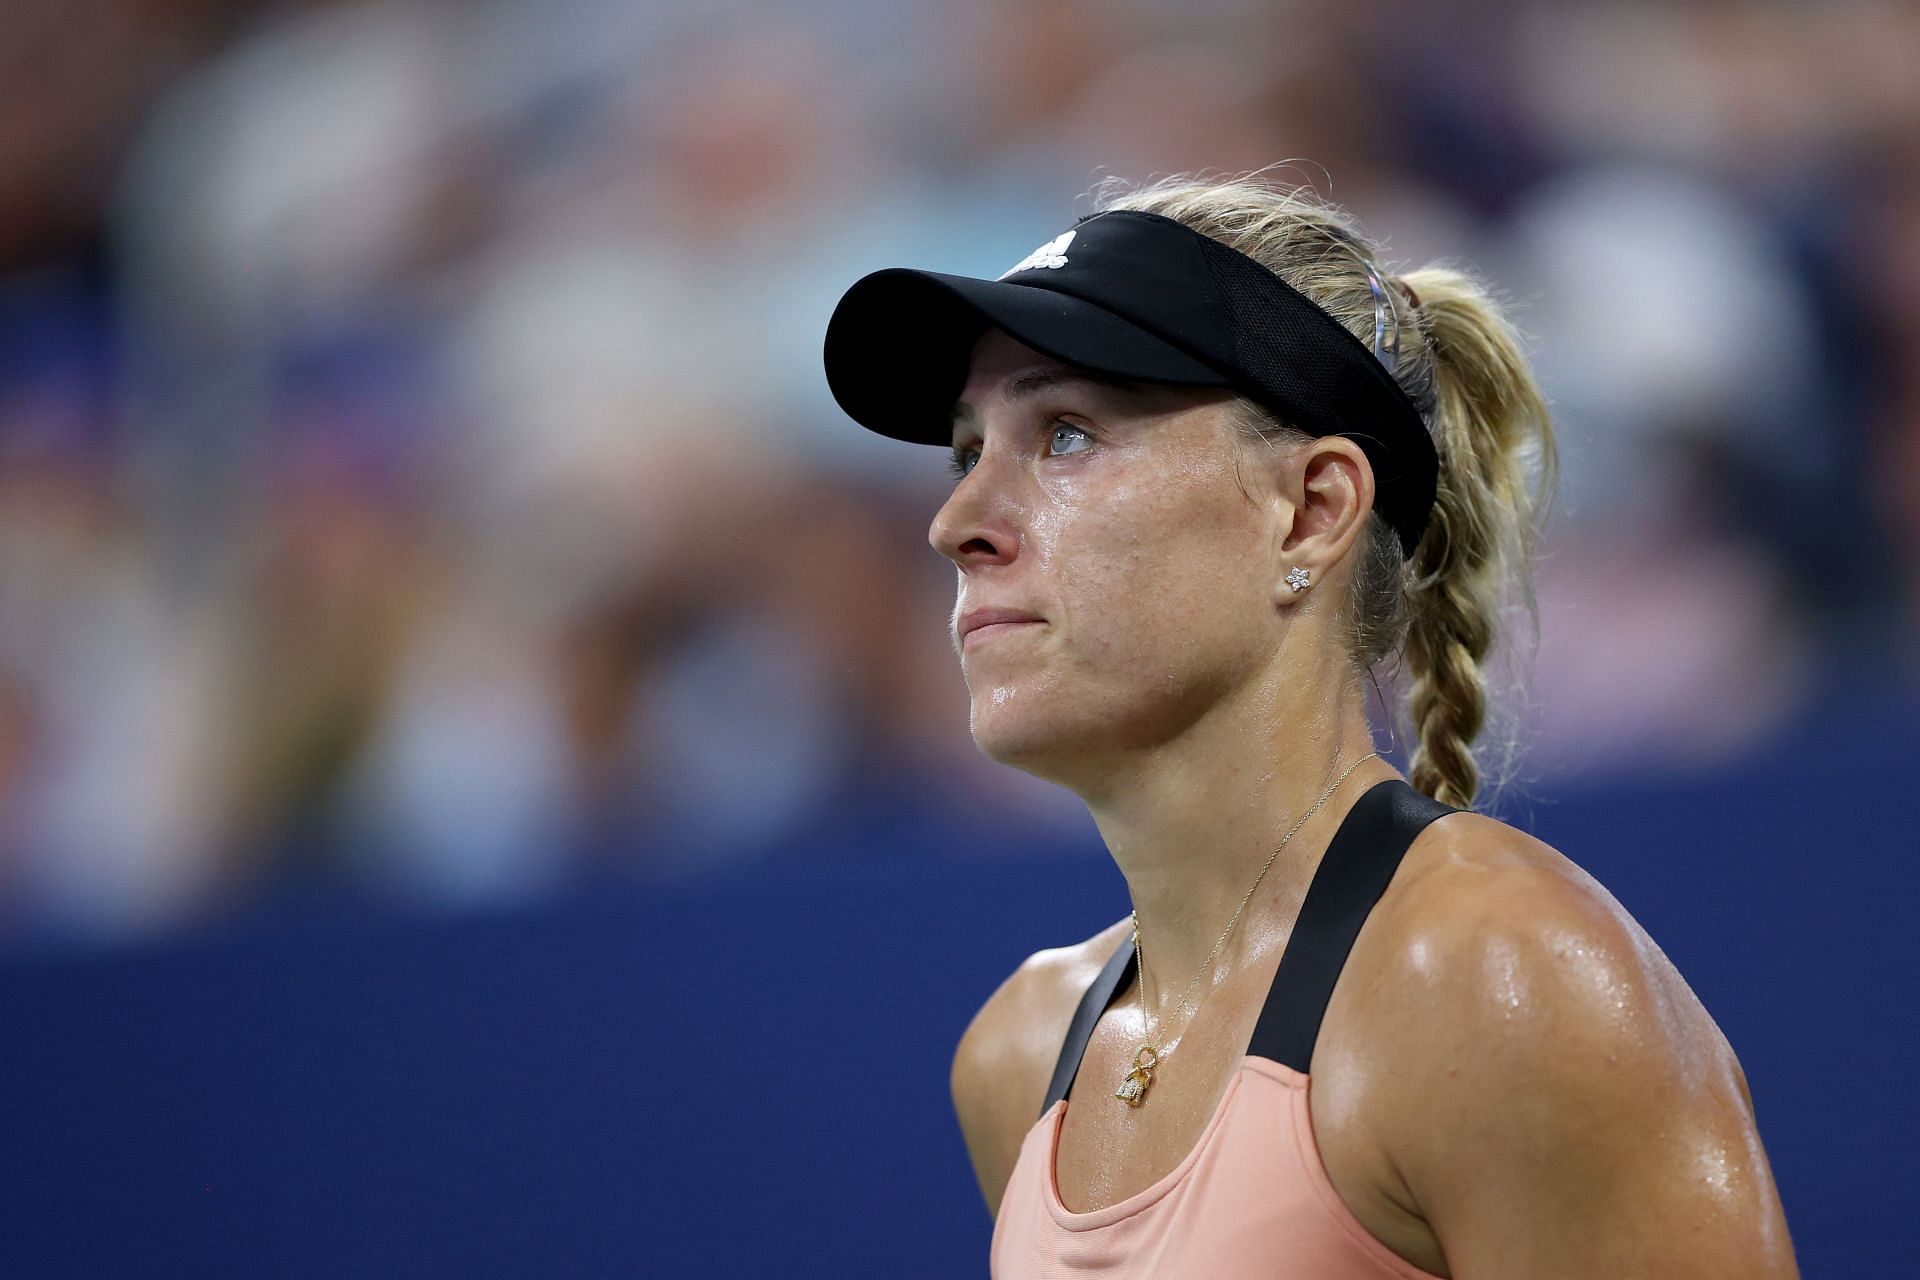 Kerber will be keen to continue her winning momentum from 2021